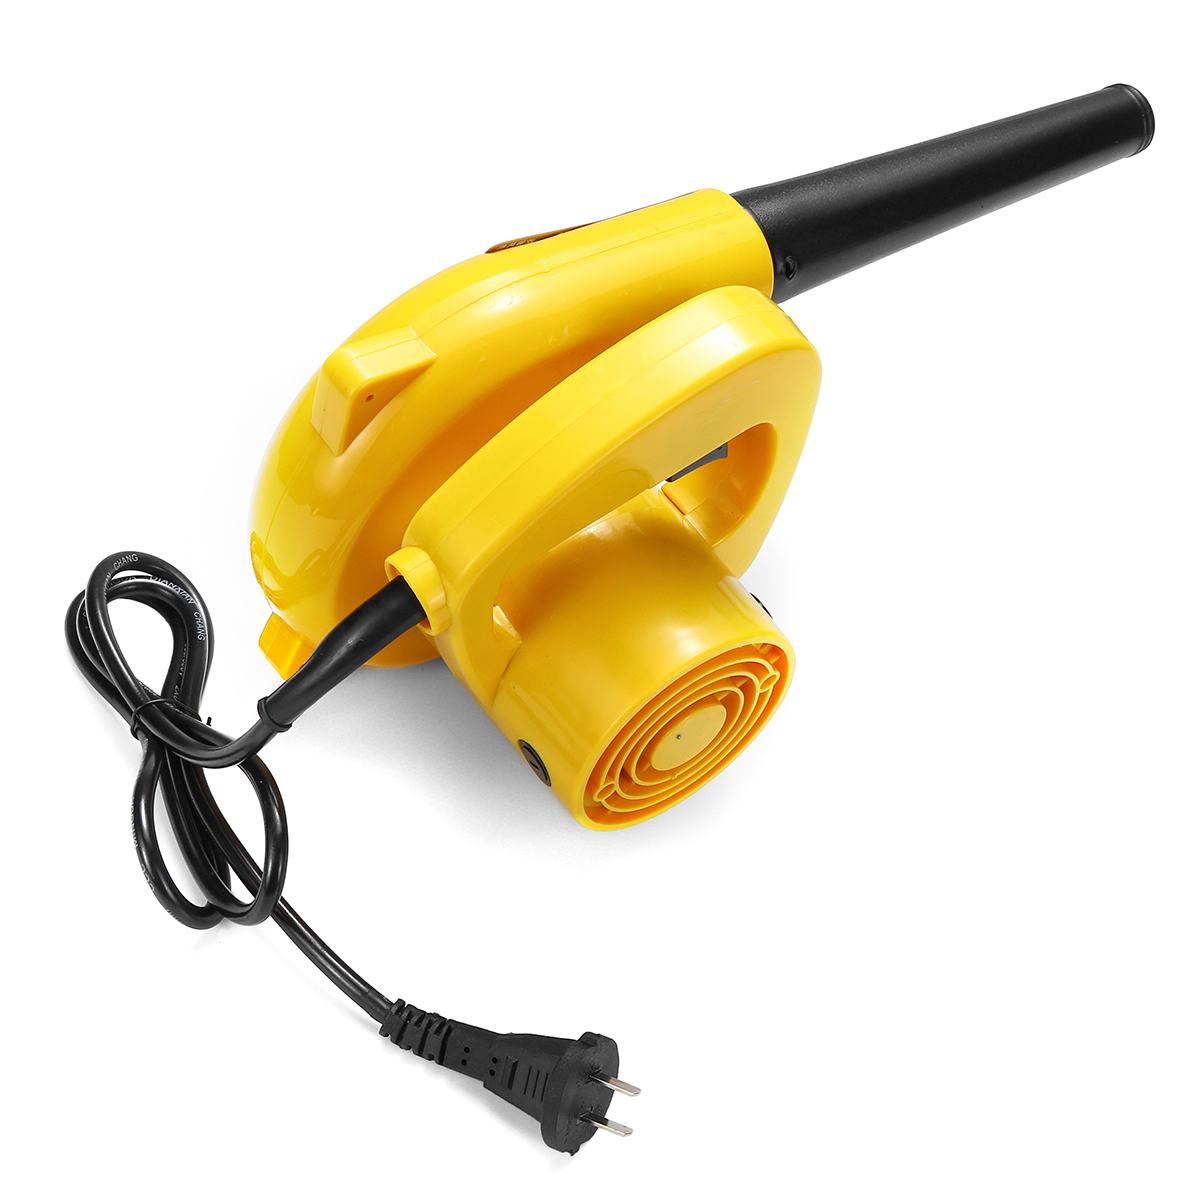 1050W Electric Leaf Blower Dust Leaf Vacuum Cleaner with Pack Electric Air Blower Vacuum Tool for Home Garden Car Studio TV Fan